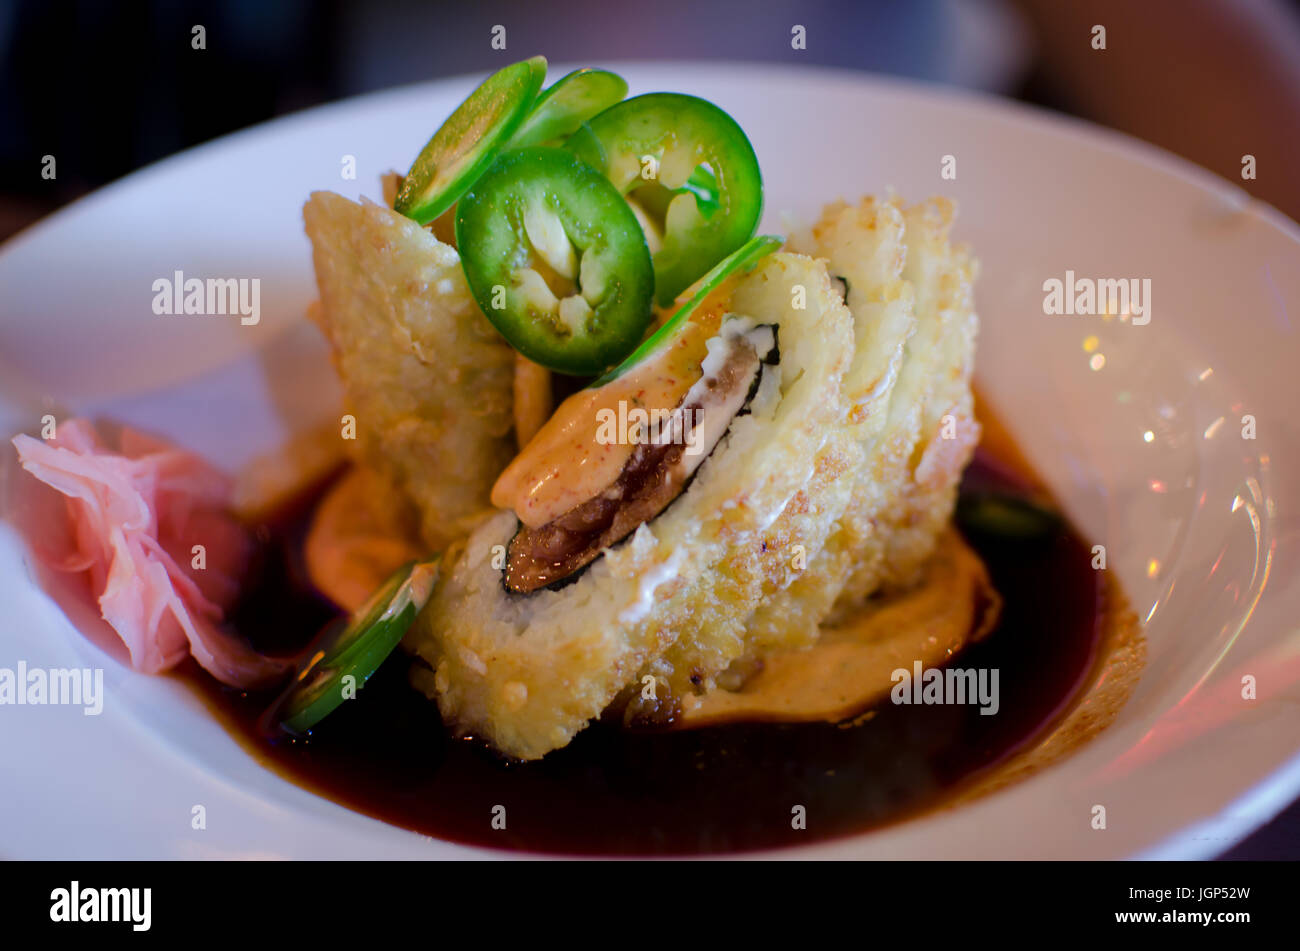 Fried spicy tuna cream cheese roll on a plate with sauce. Stock Photo